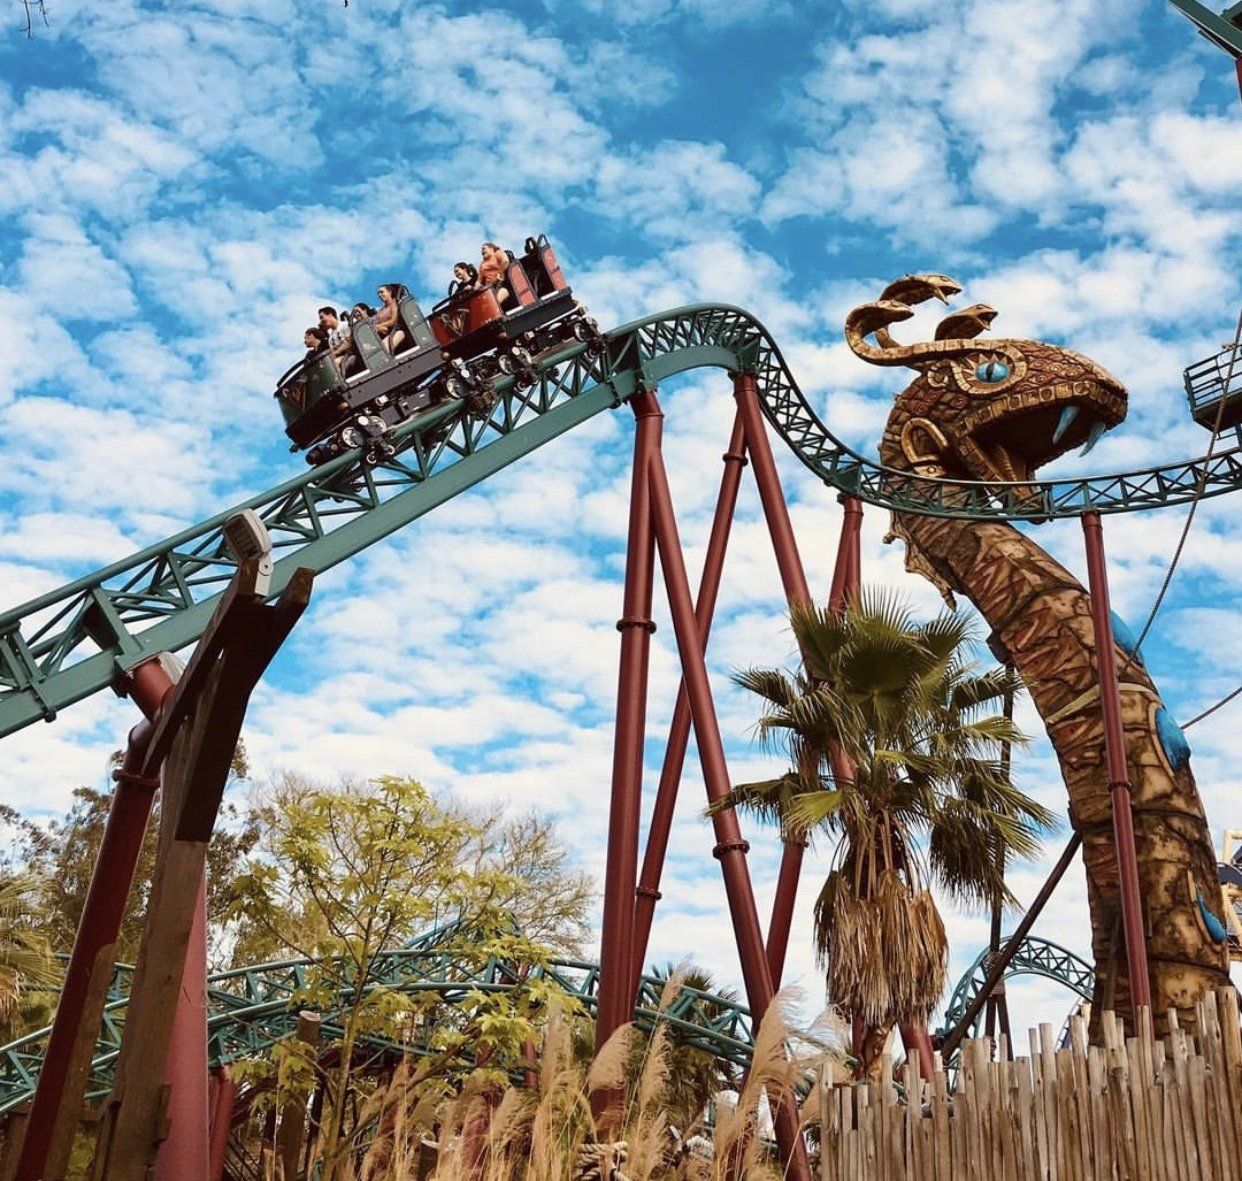 World’s Most Expensive Theme Park: world record in Tampa, Florida